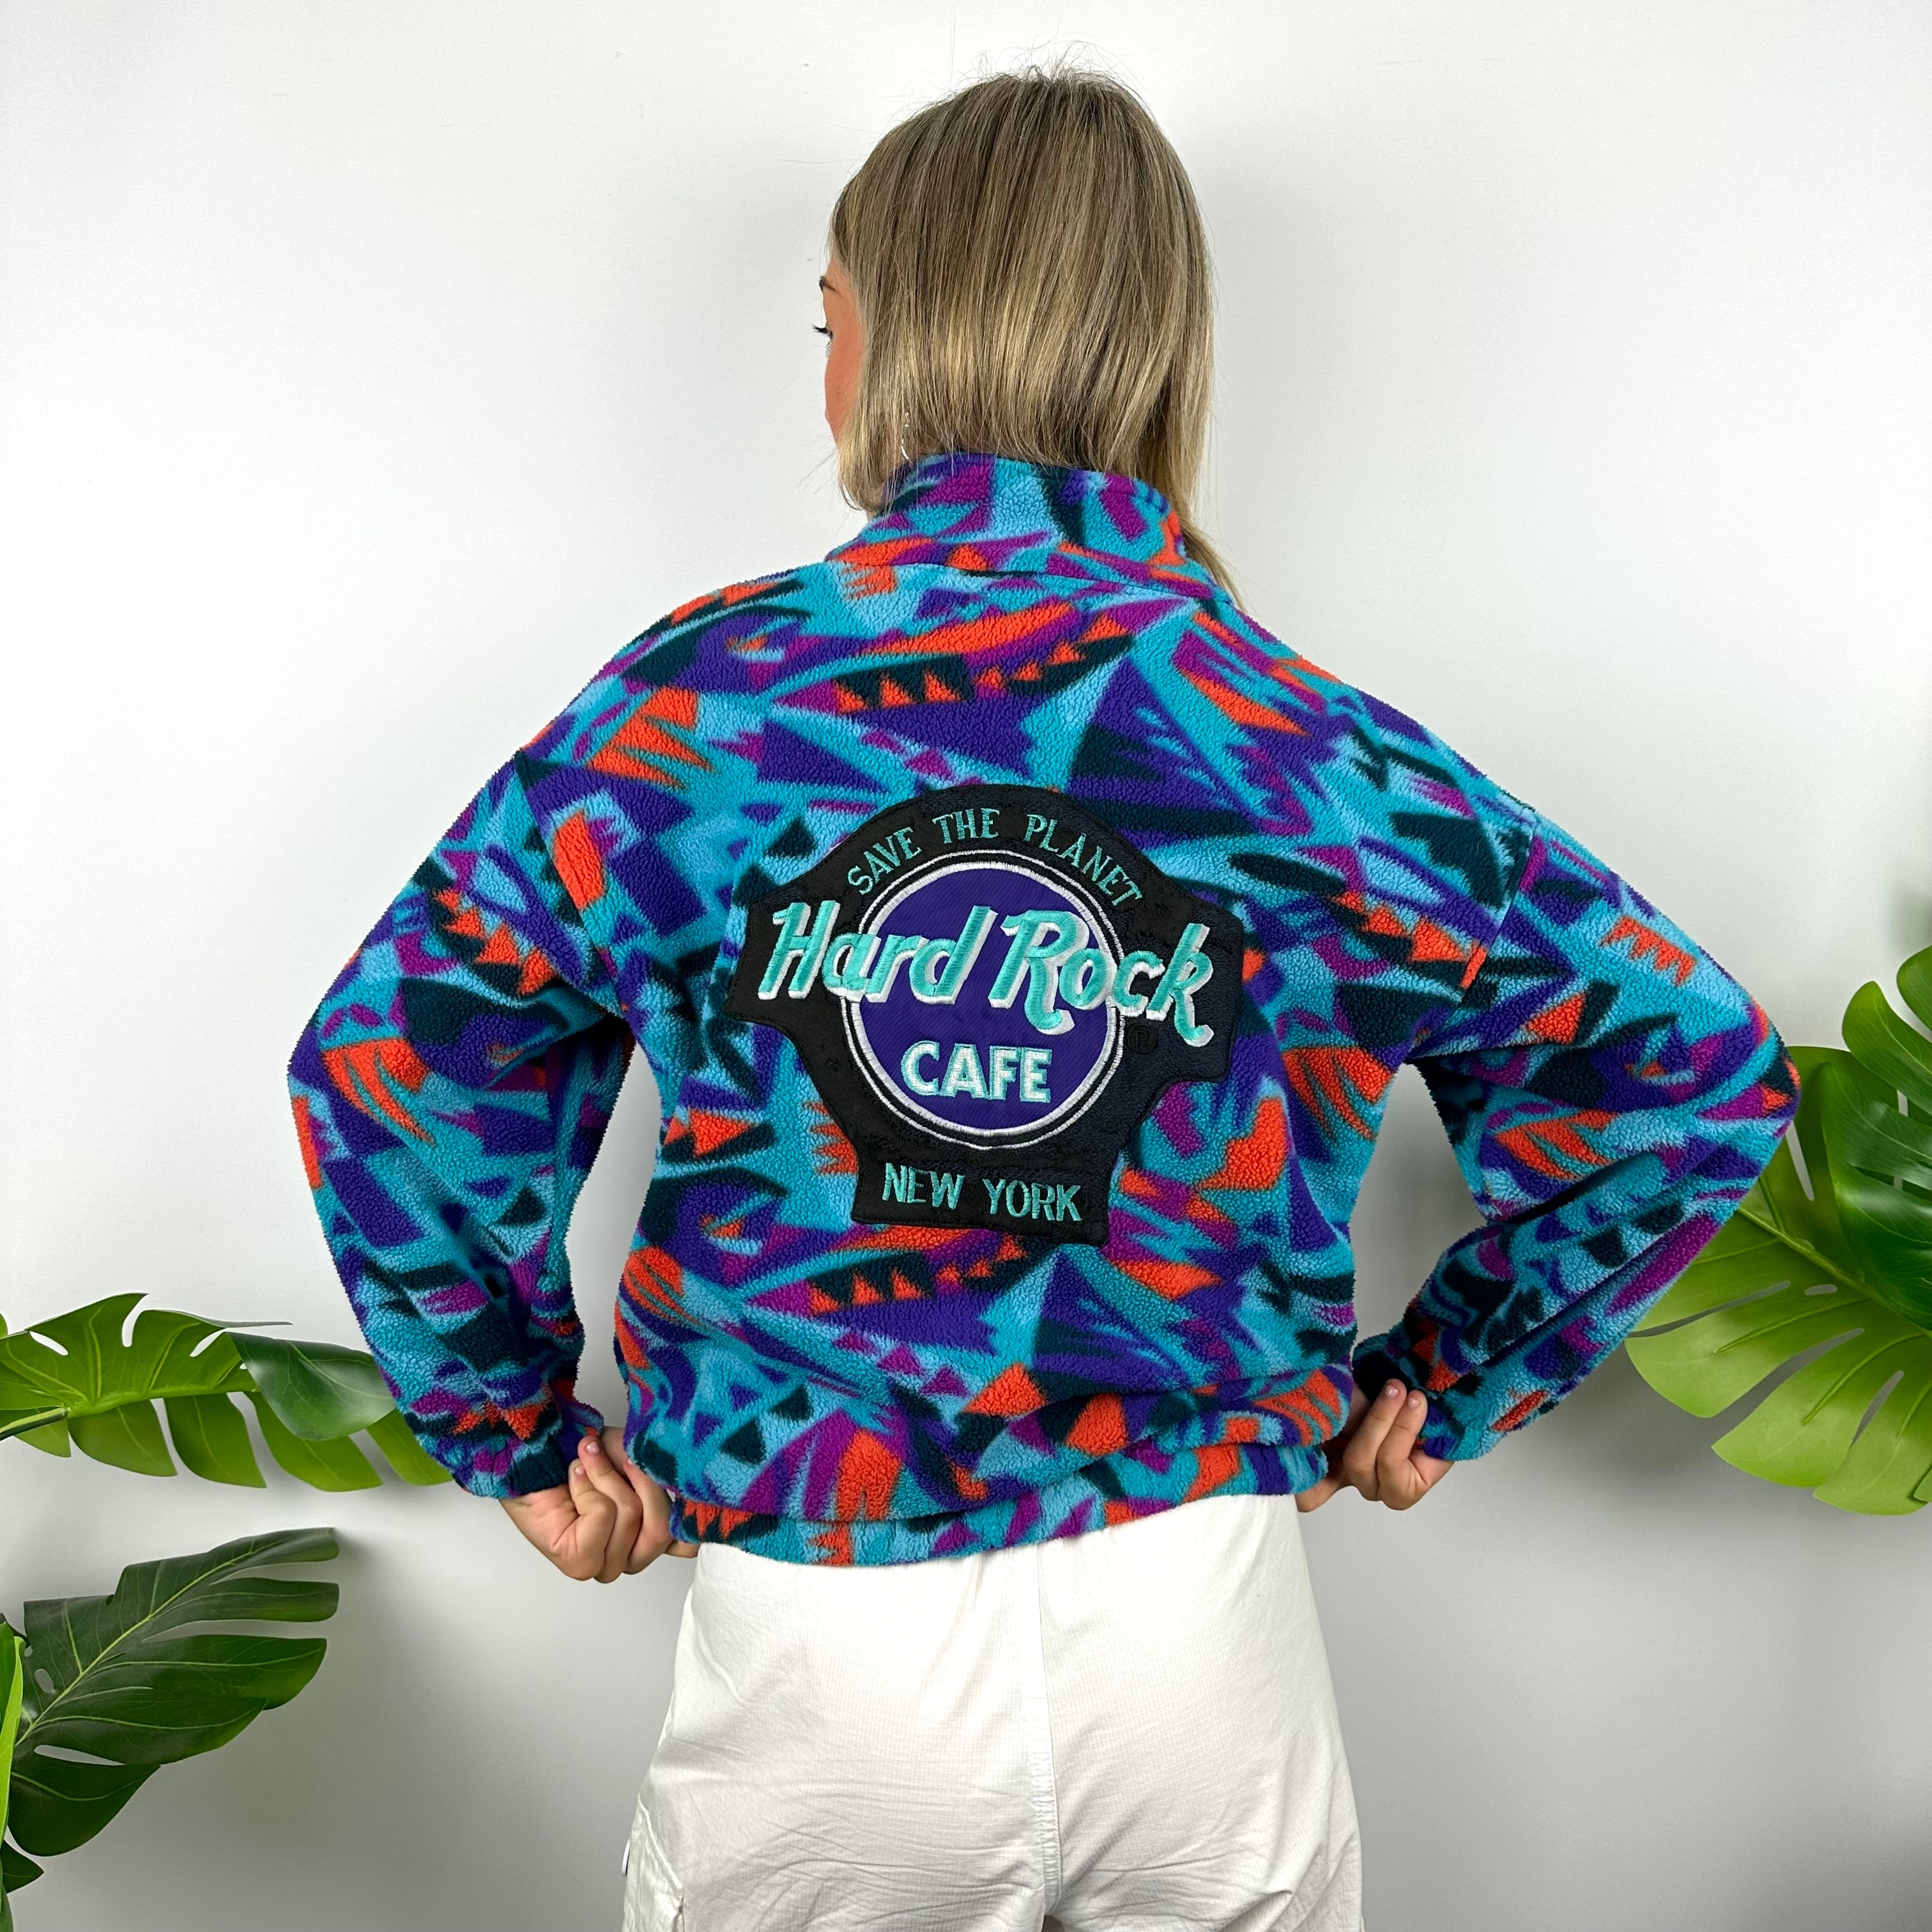 Hard Rock Cafe Embroidered Spell Out Funky Teddy Bear Fleece Zip Up Jacket (S)